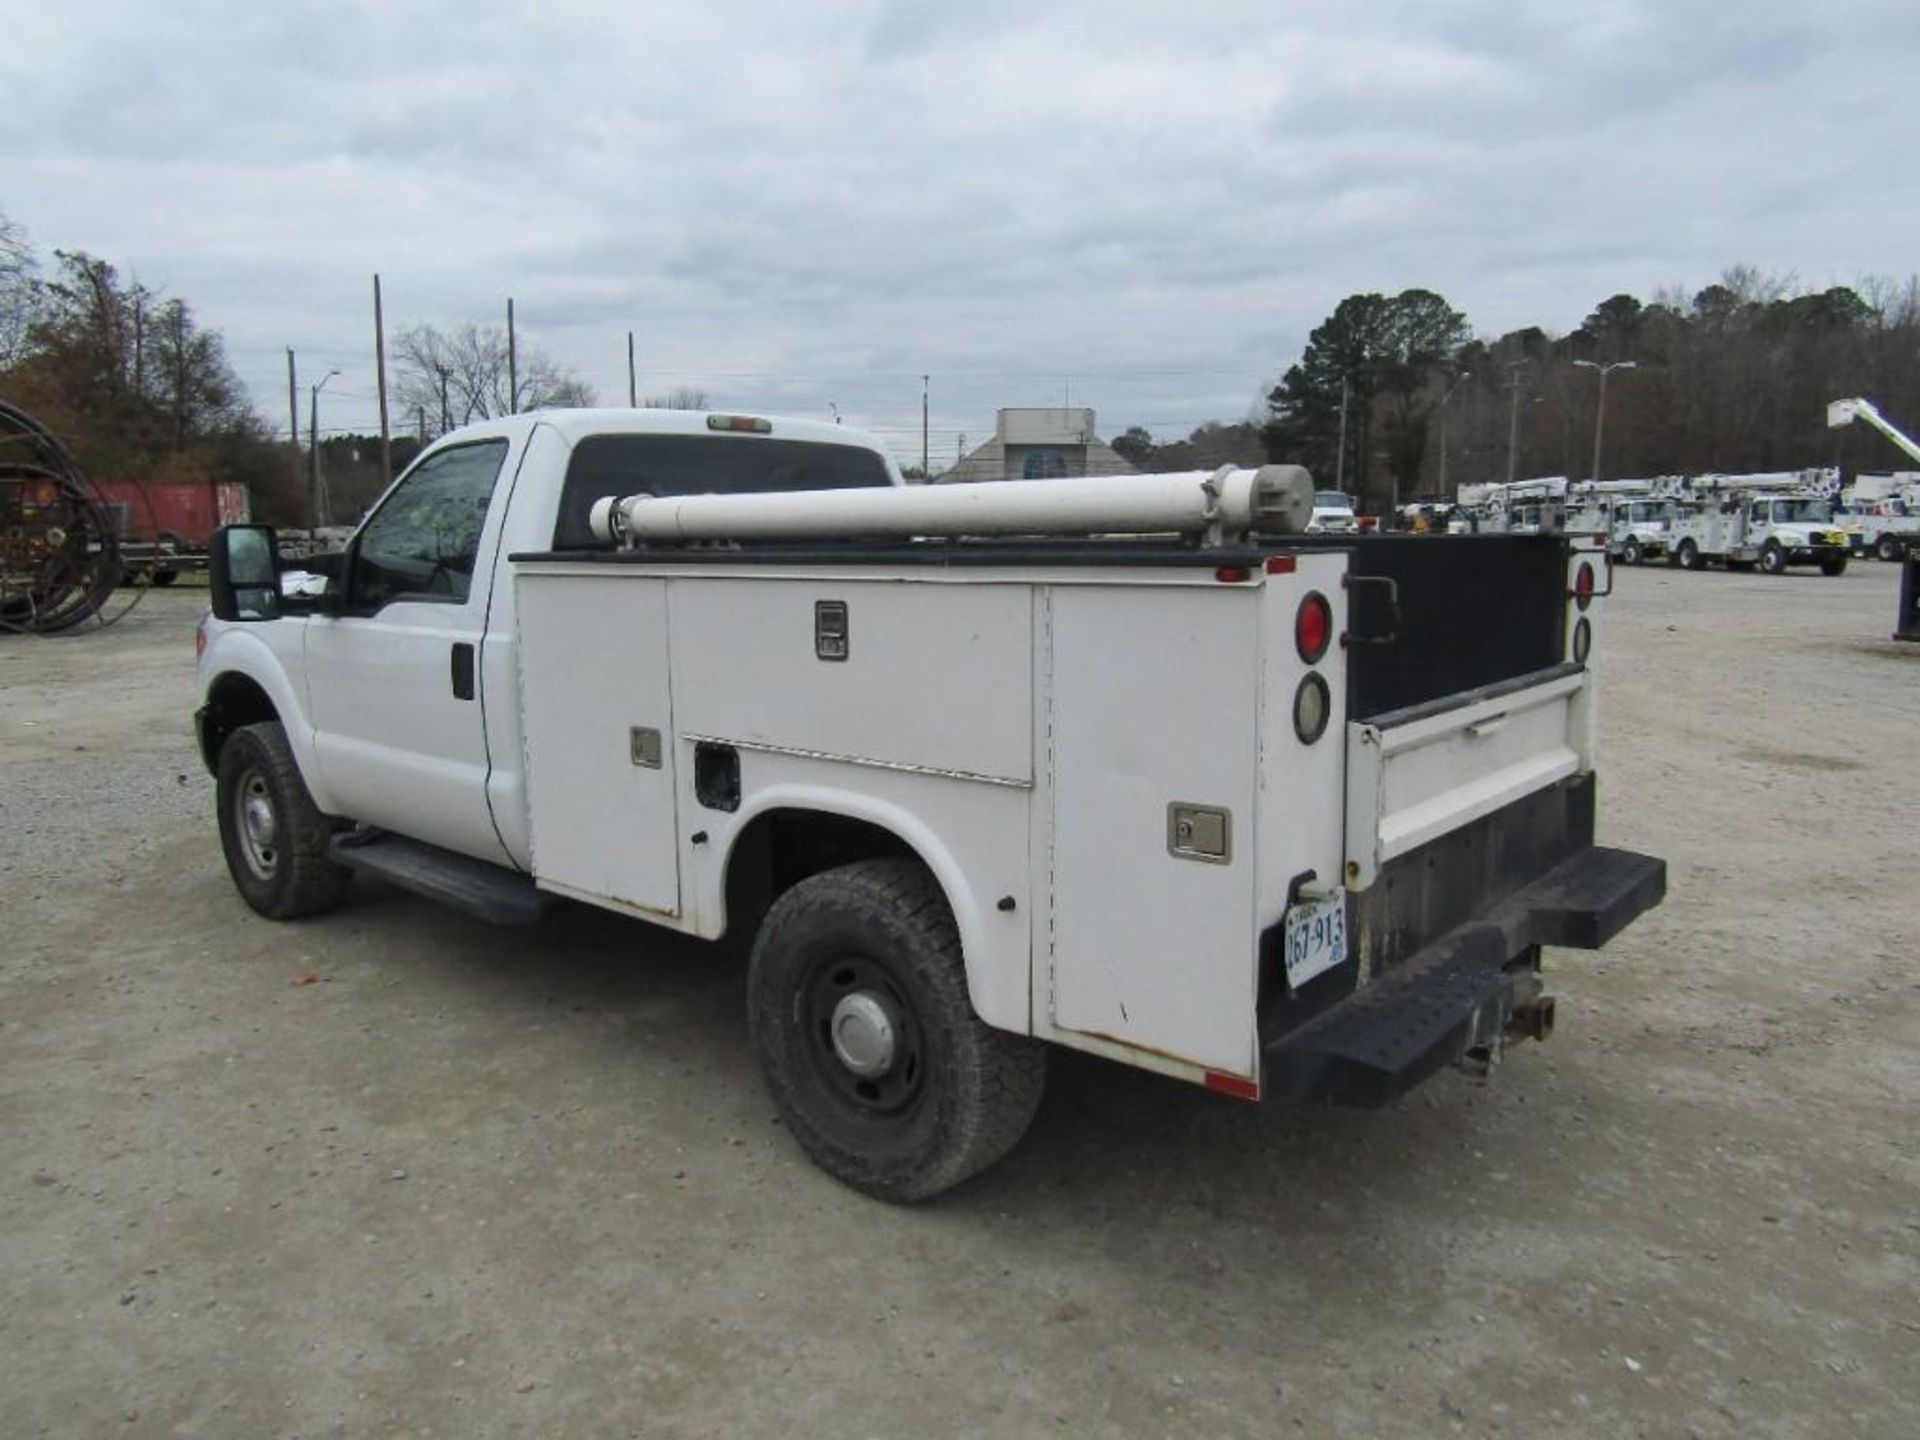 2011 Ford F350 4x4 Utility Truck - Image 4 of 27